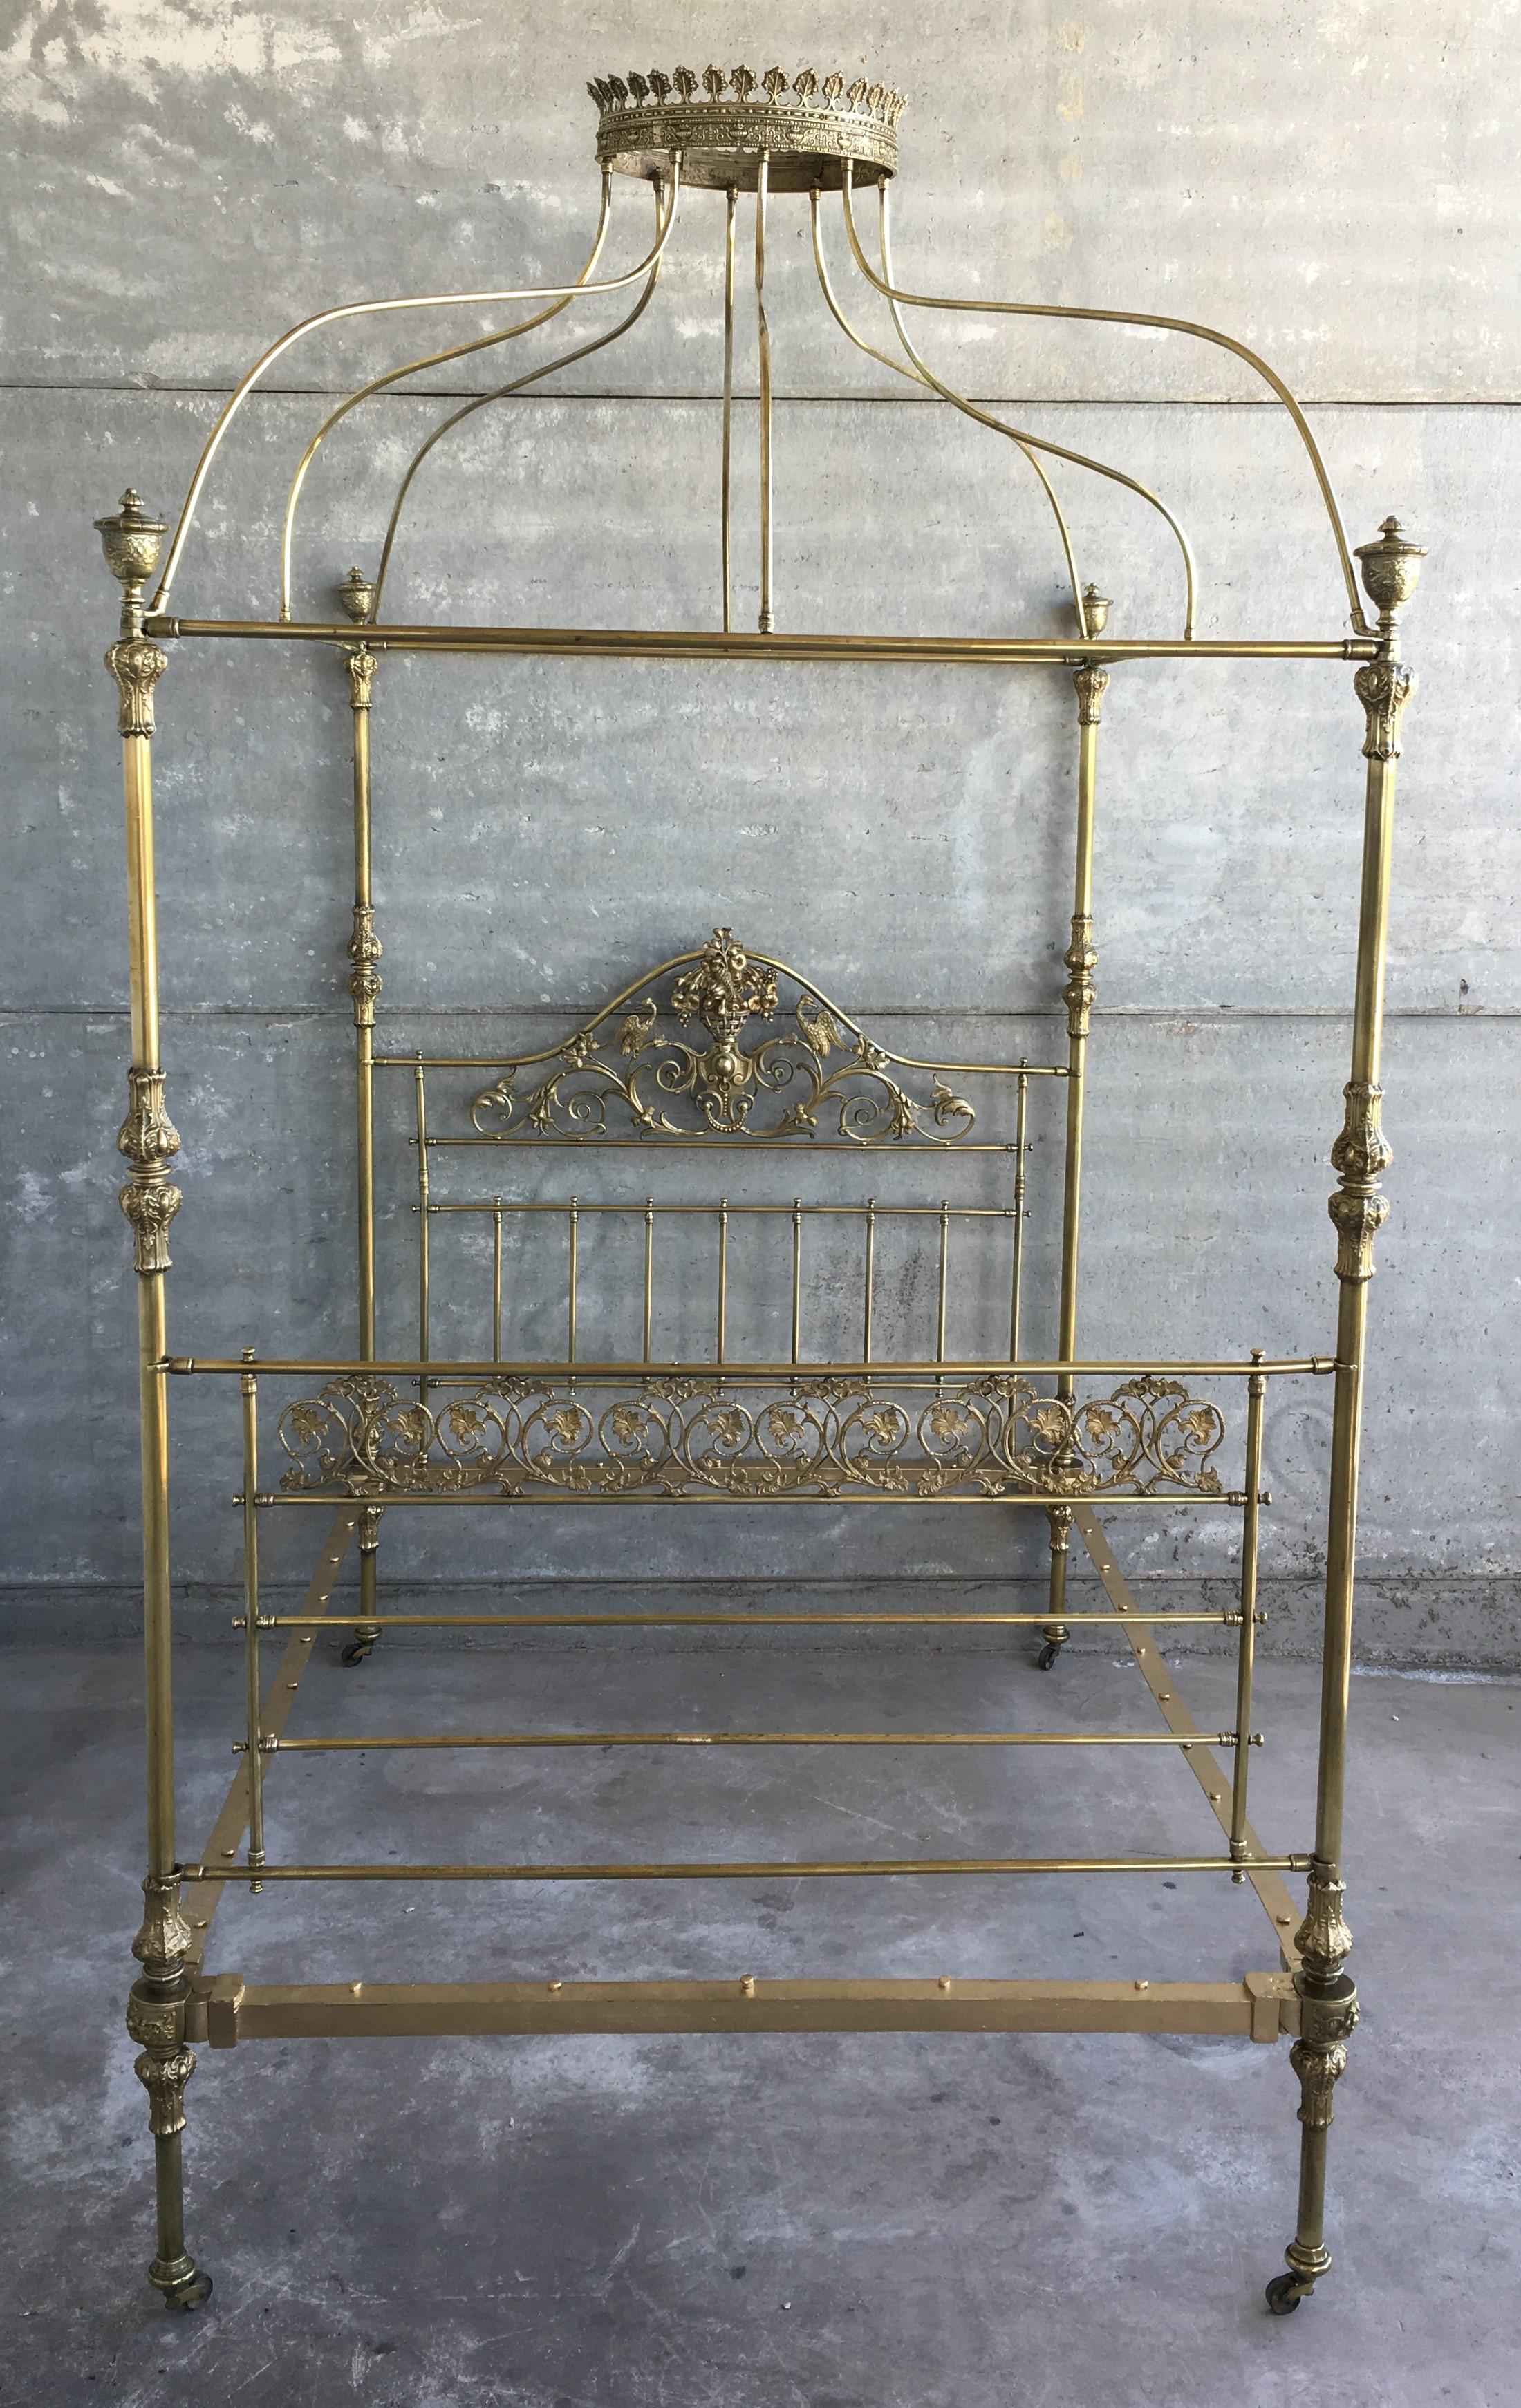 19th century wide brass four poster bed with bird castings, ornamental motifs and crown
A magnificent all brass four poster bed with etched posts, ornate brass fittings, decorative brass knee-caps, delicate castings depicting birds and serpentine